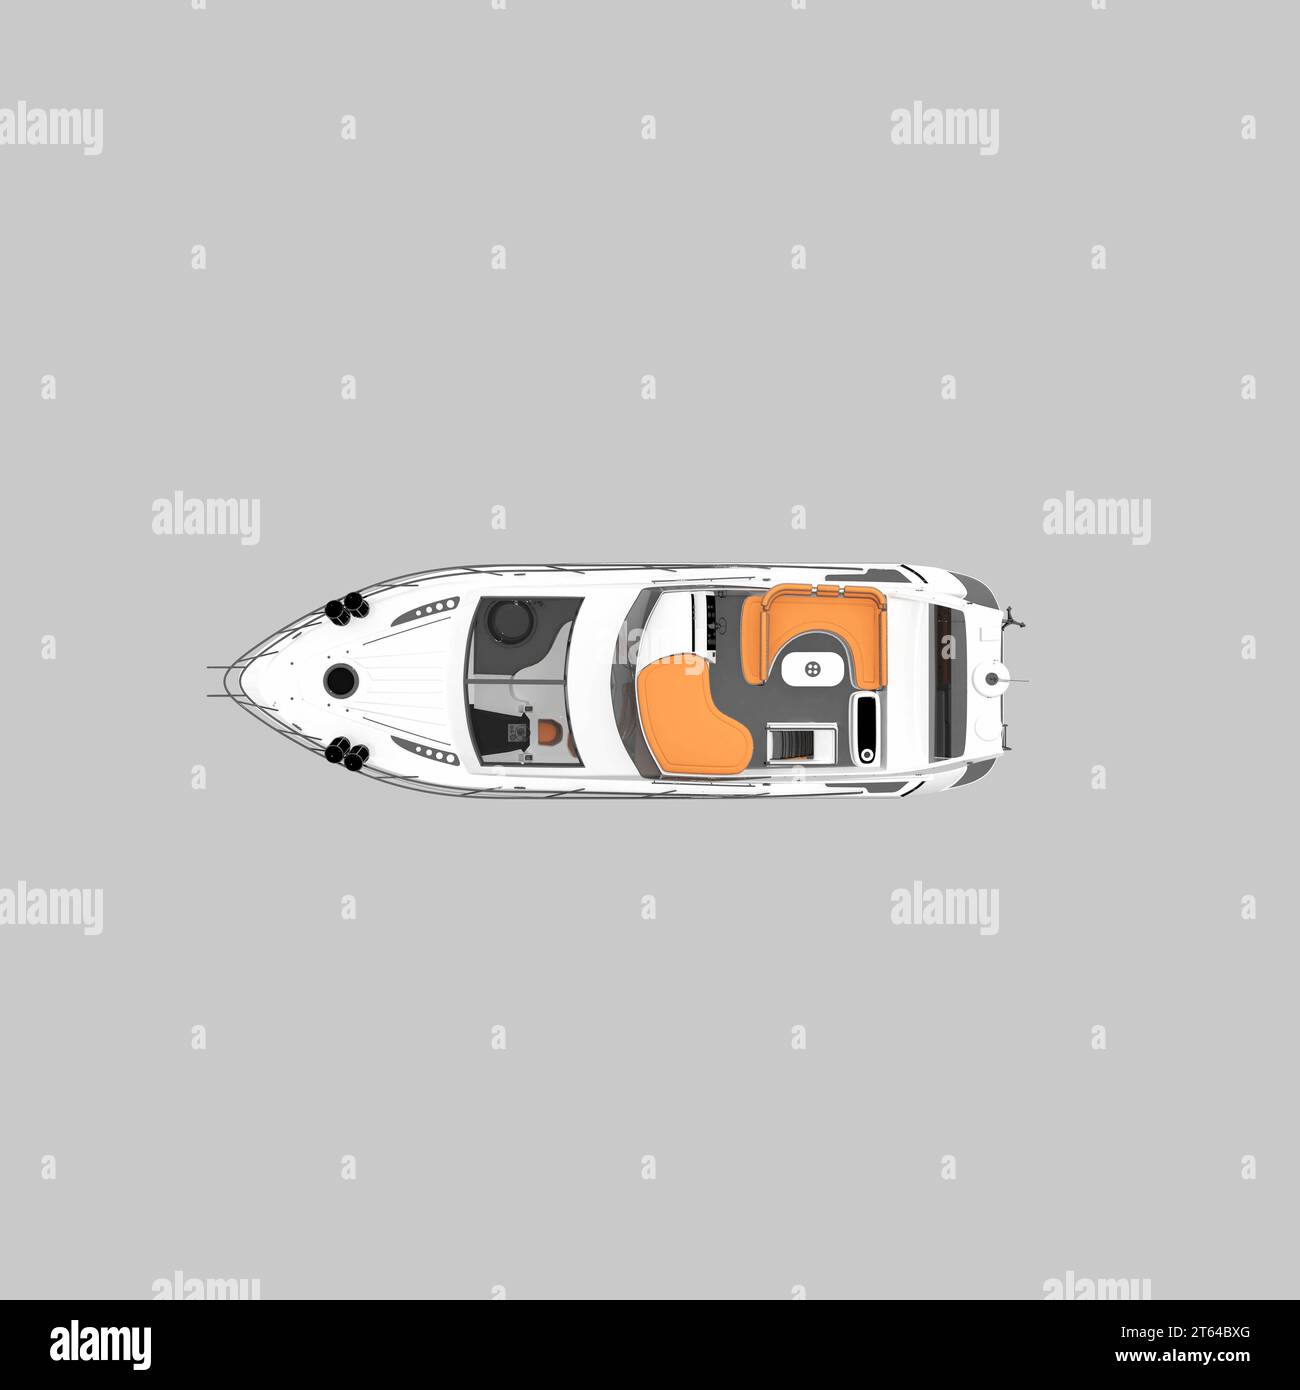 3d render of speed boat Stock Photo